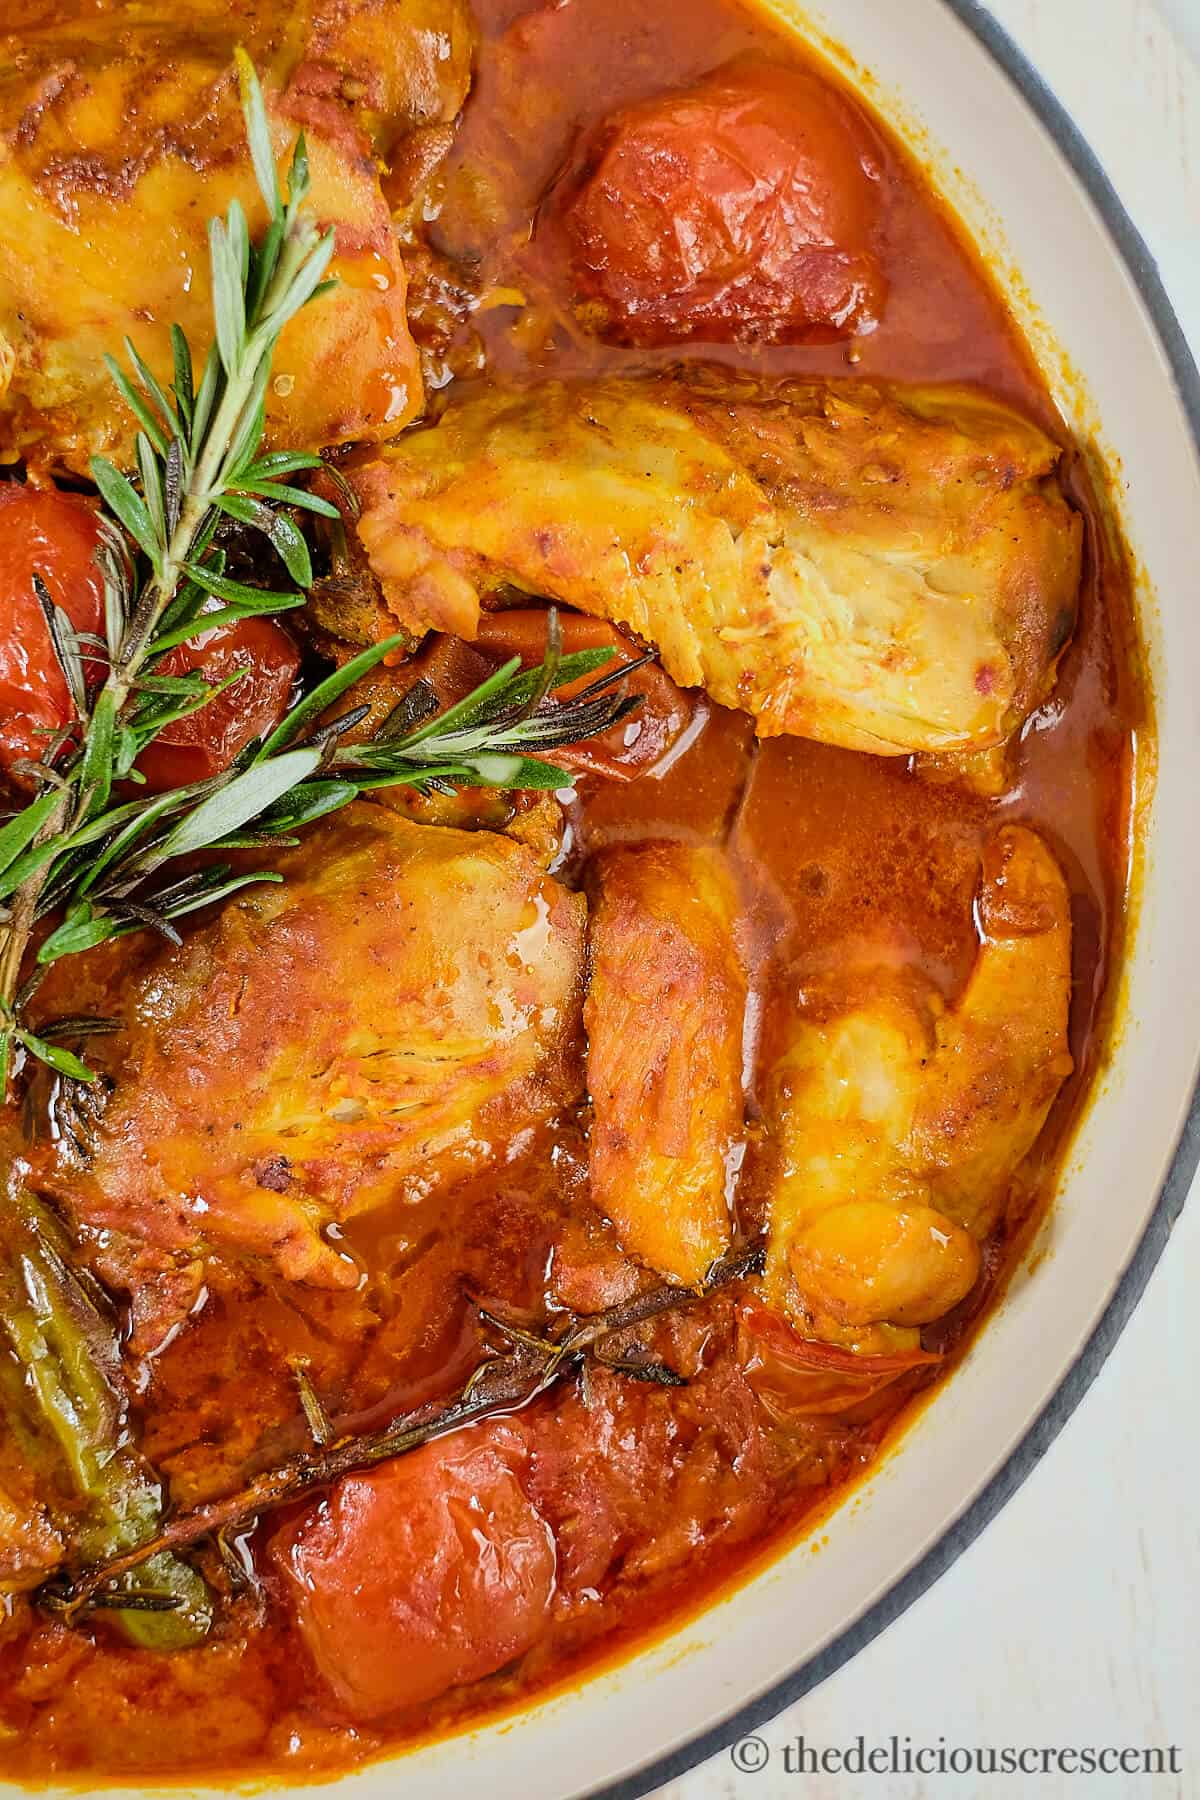 Braised tomato chicken cooked with rosemary.